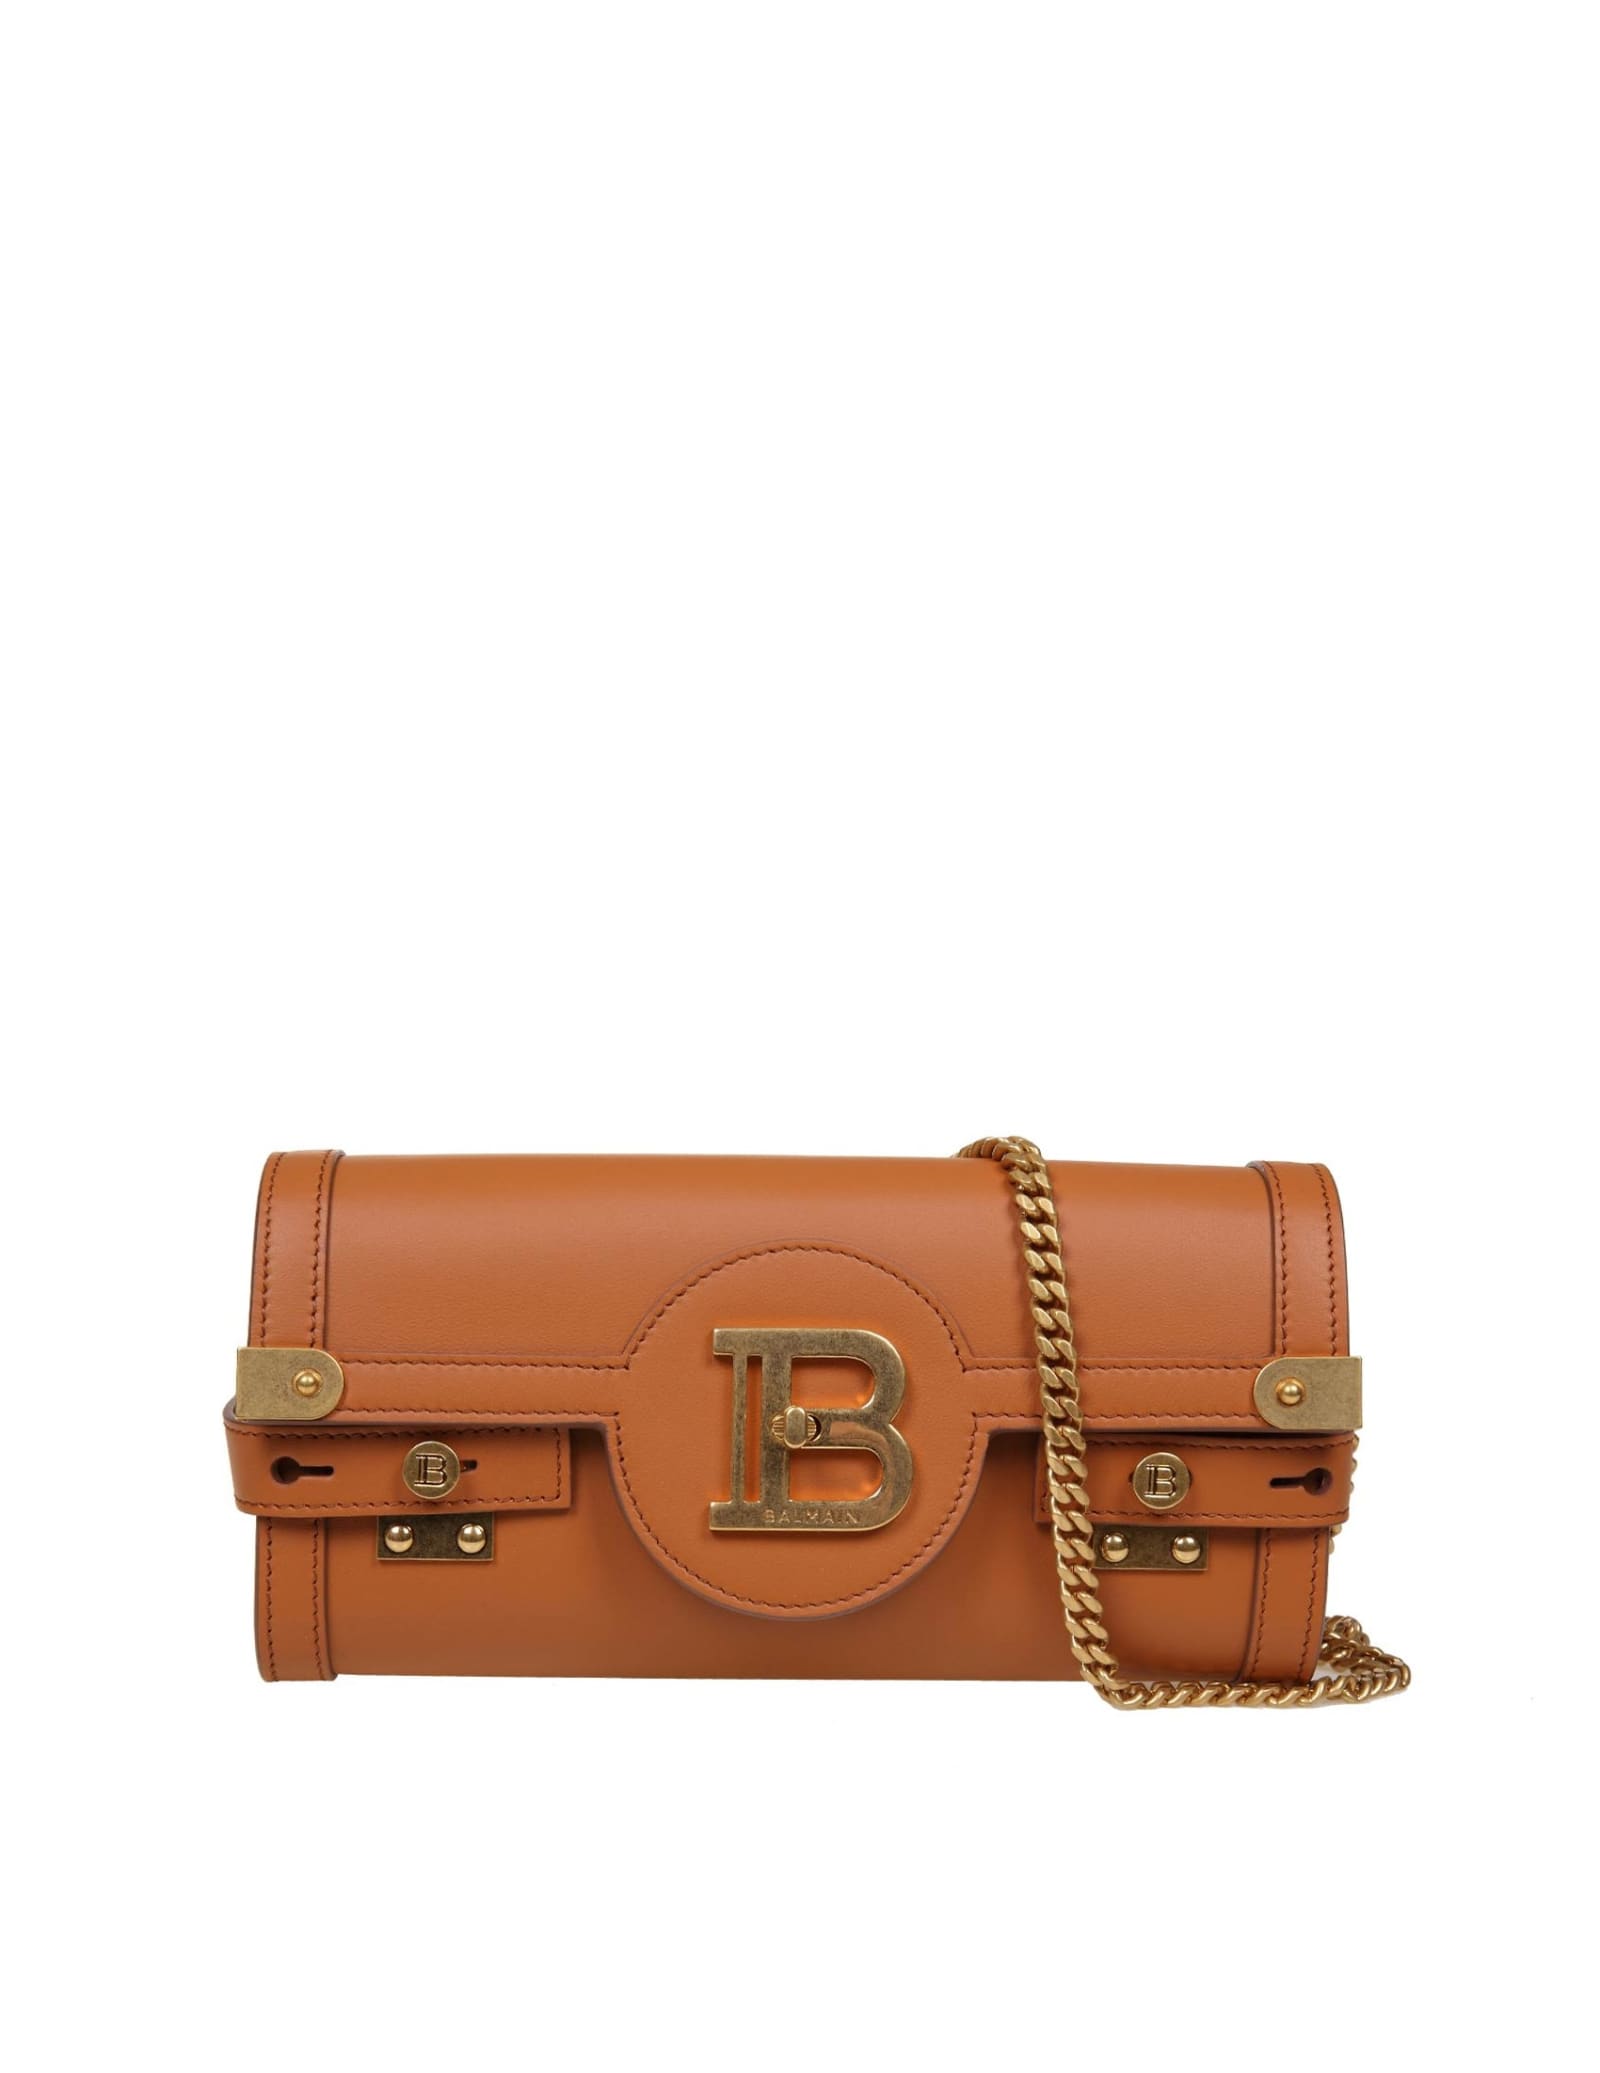 BALMAIN CLUTCH B-BUZZ 23 IN LEATHER SMOOTH LEATHER,VN0LE596LVPT 8FF